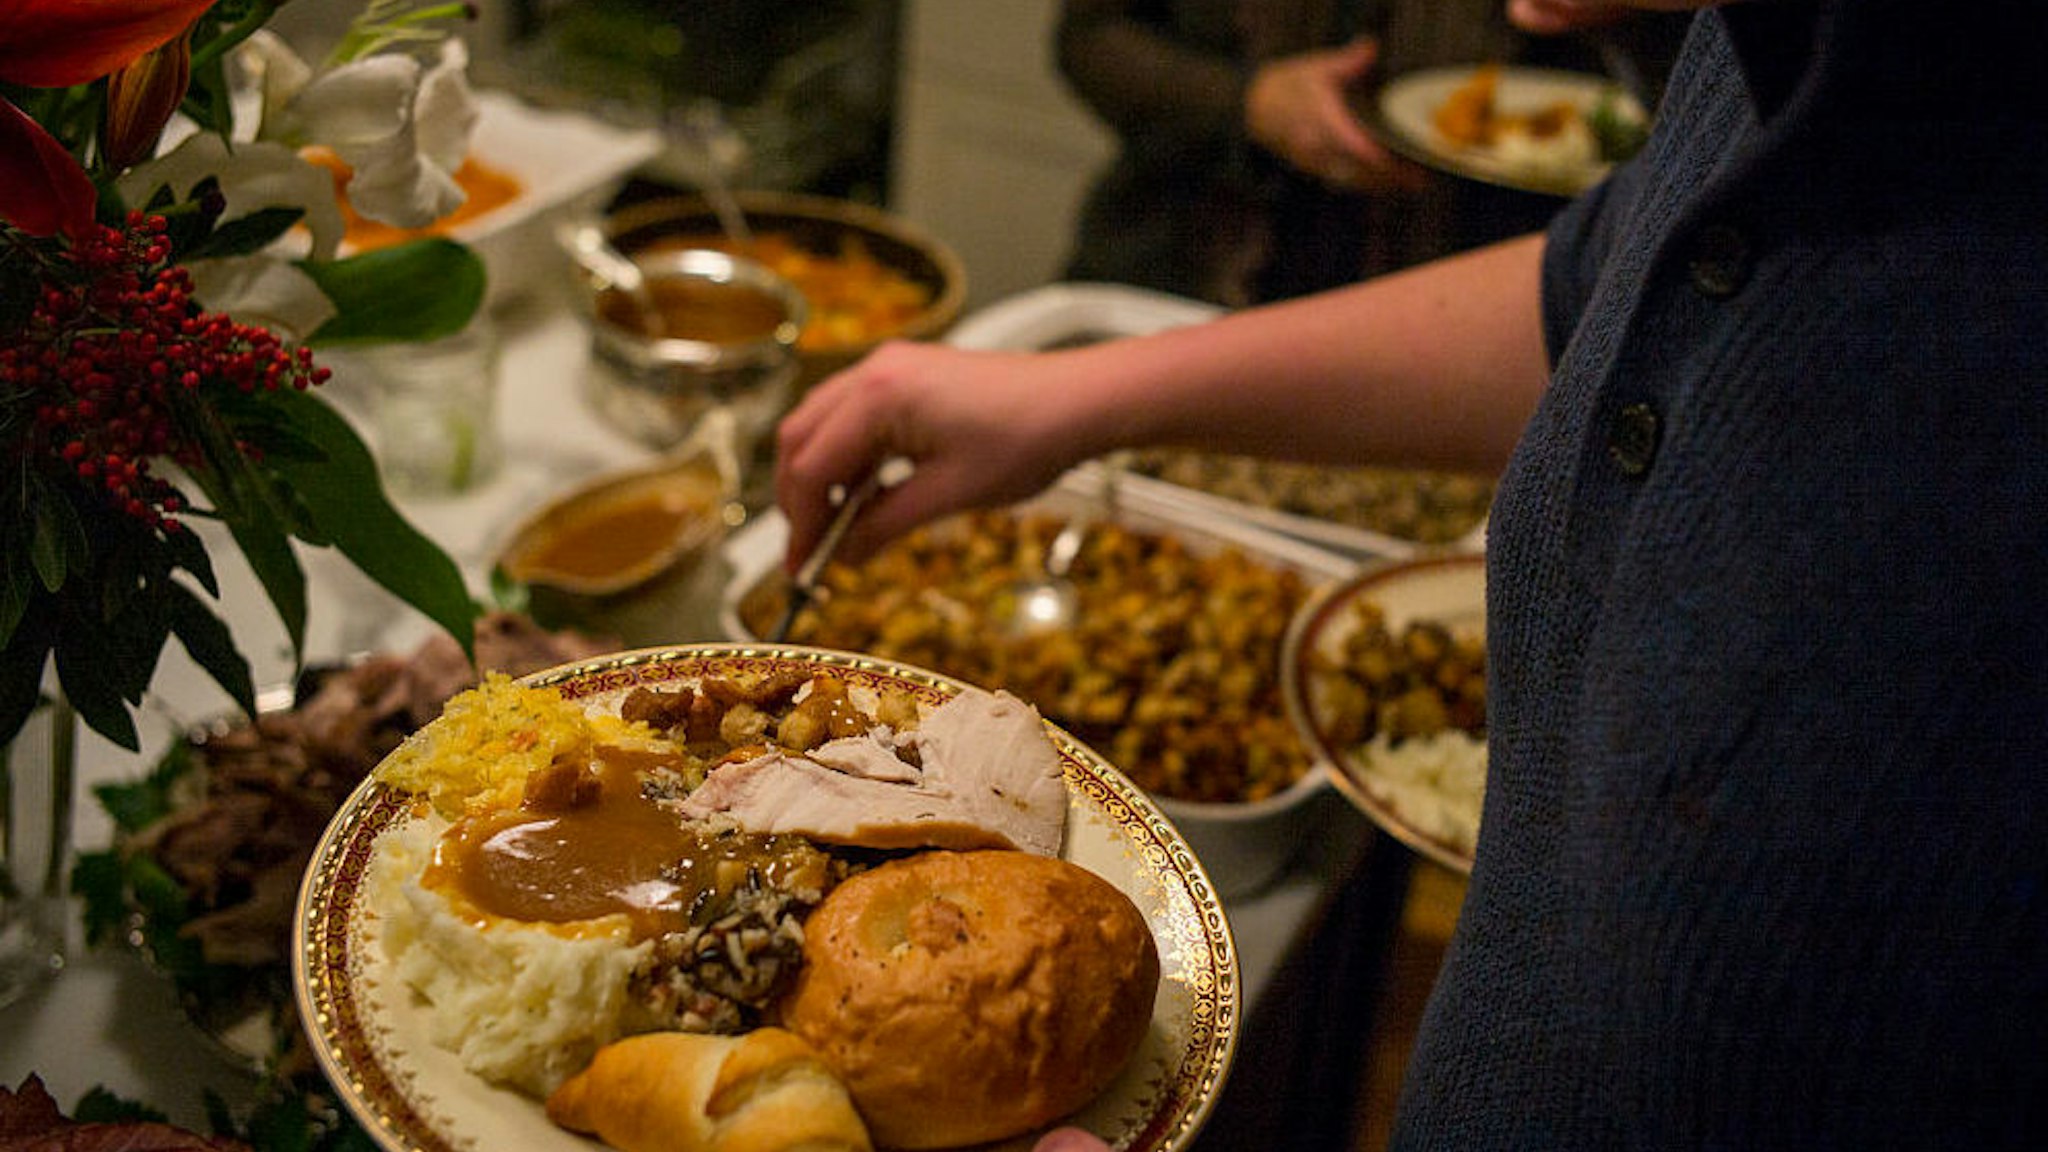 Unidentified diners serve themselves food at a traditional Thanksgiving Day family gathering in Bloomfield Hills, Michigan on November 26, 2015.